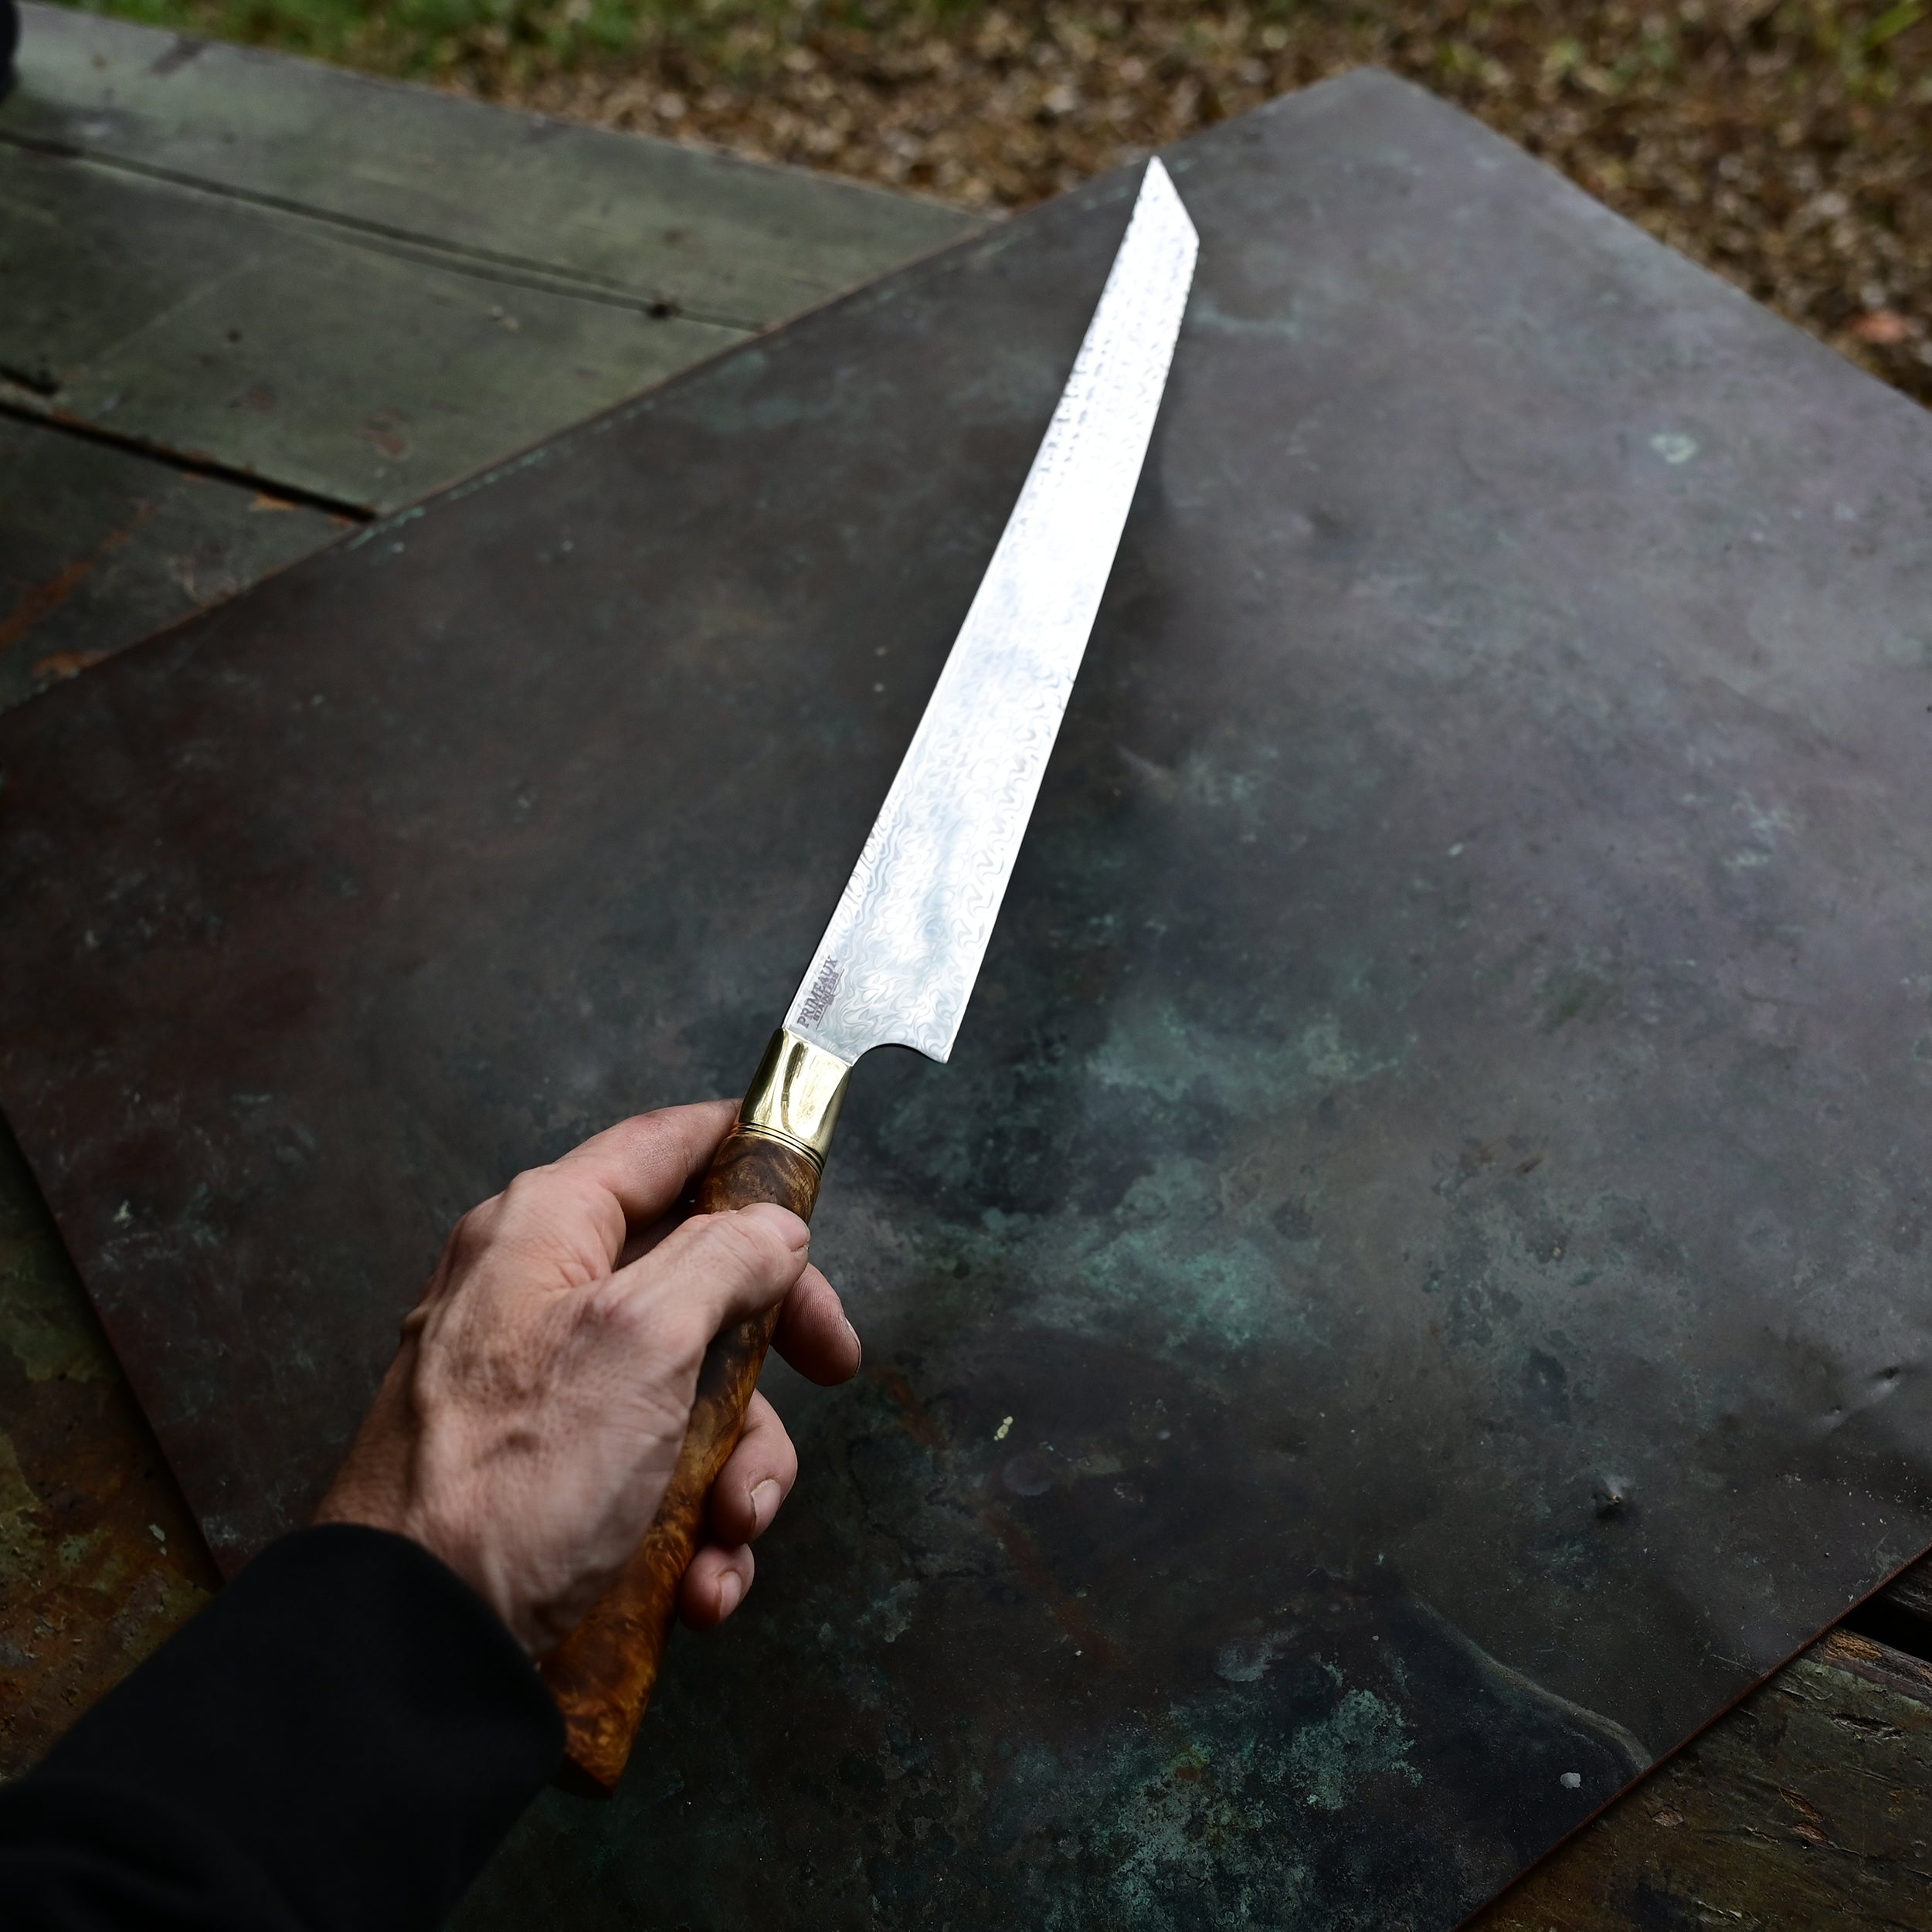 Investing in Quality: The Primeaux Knife Experience